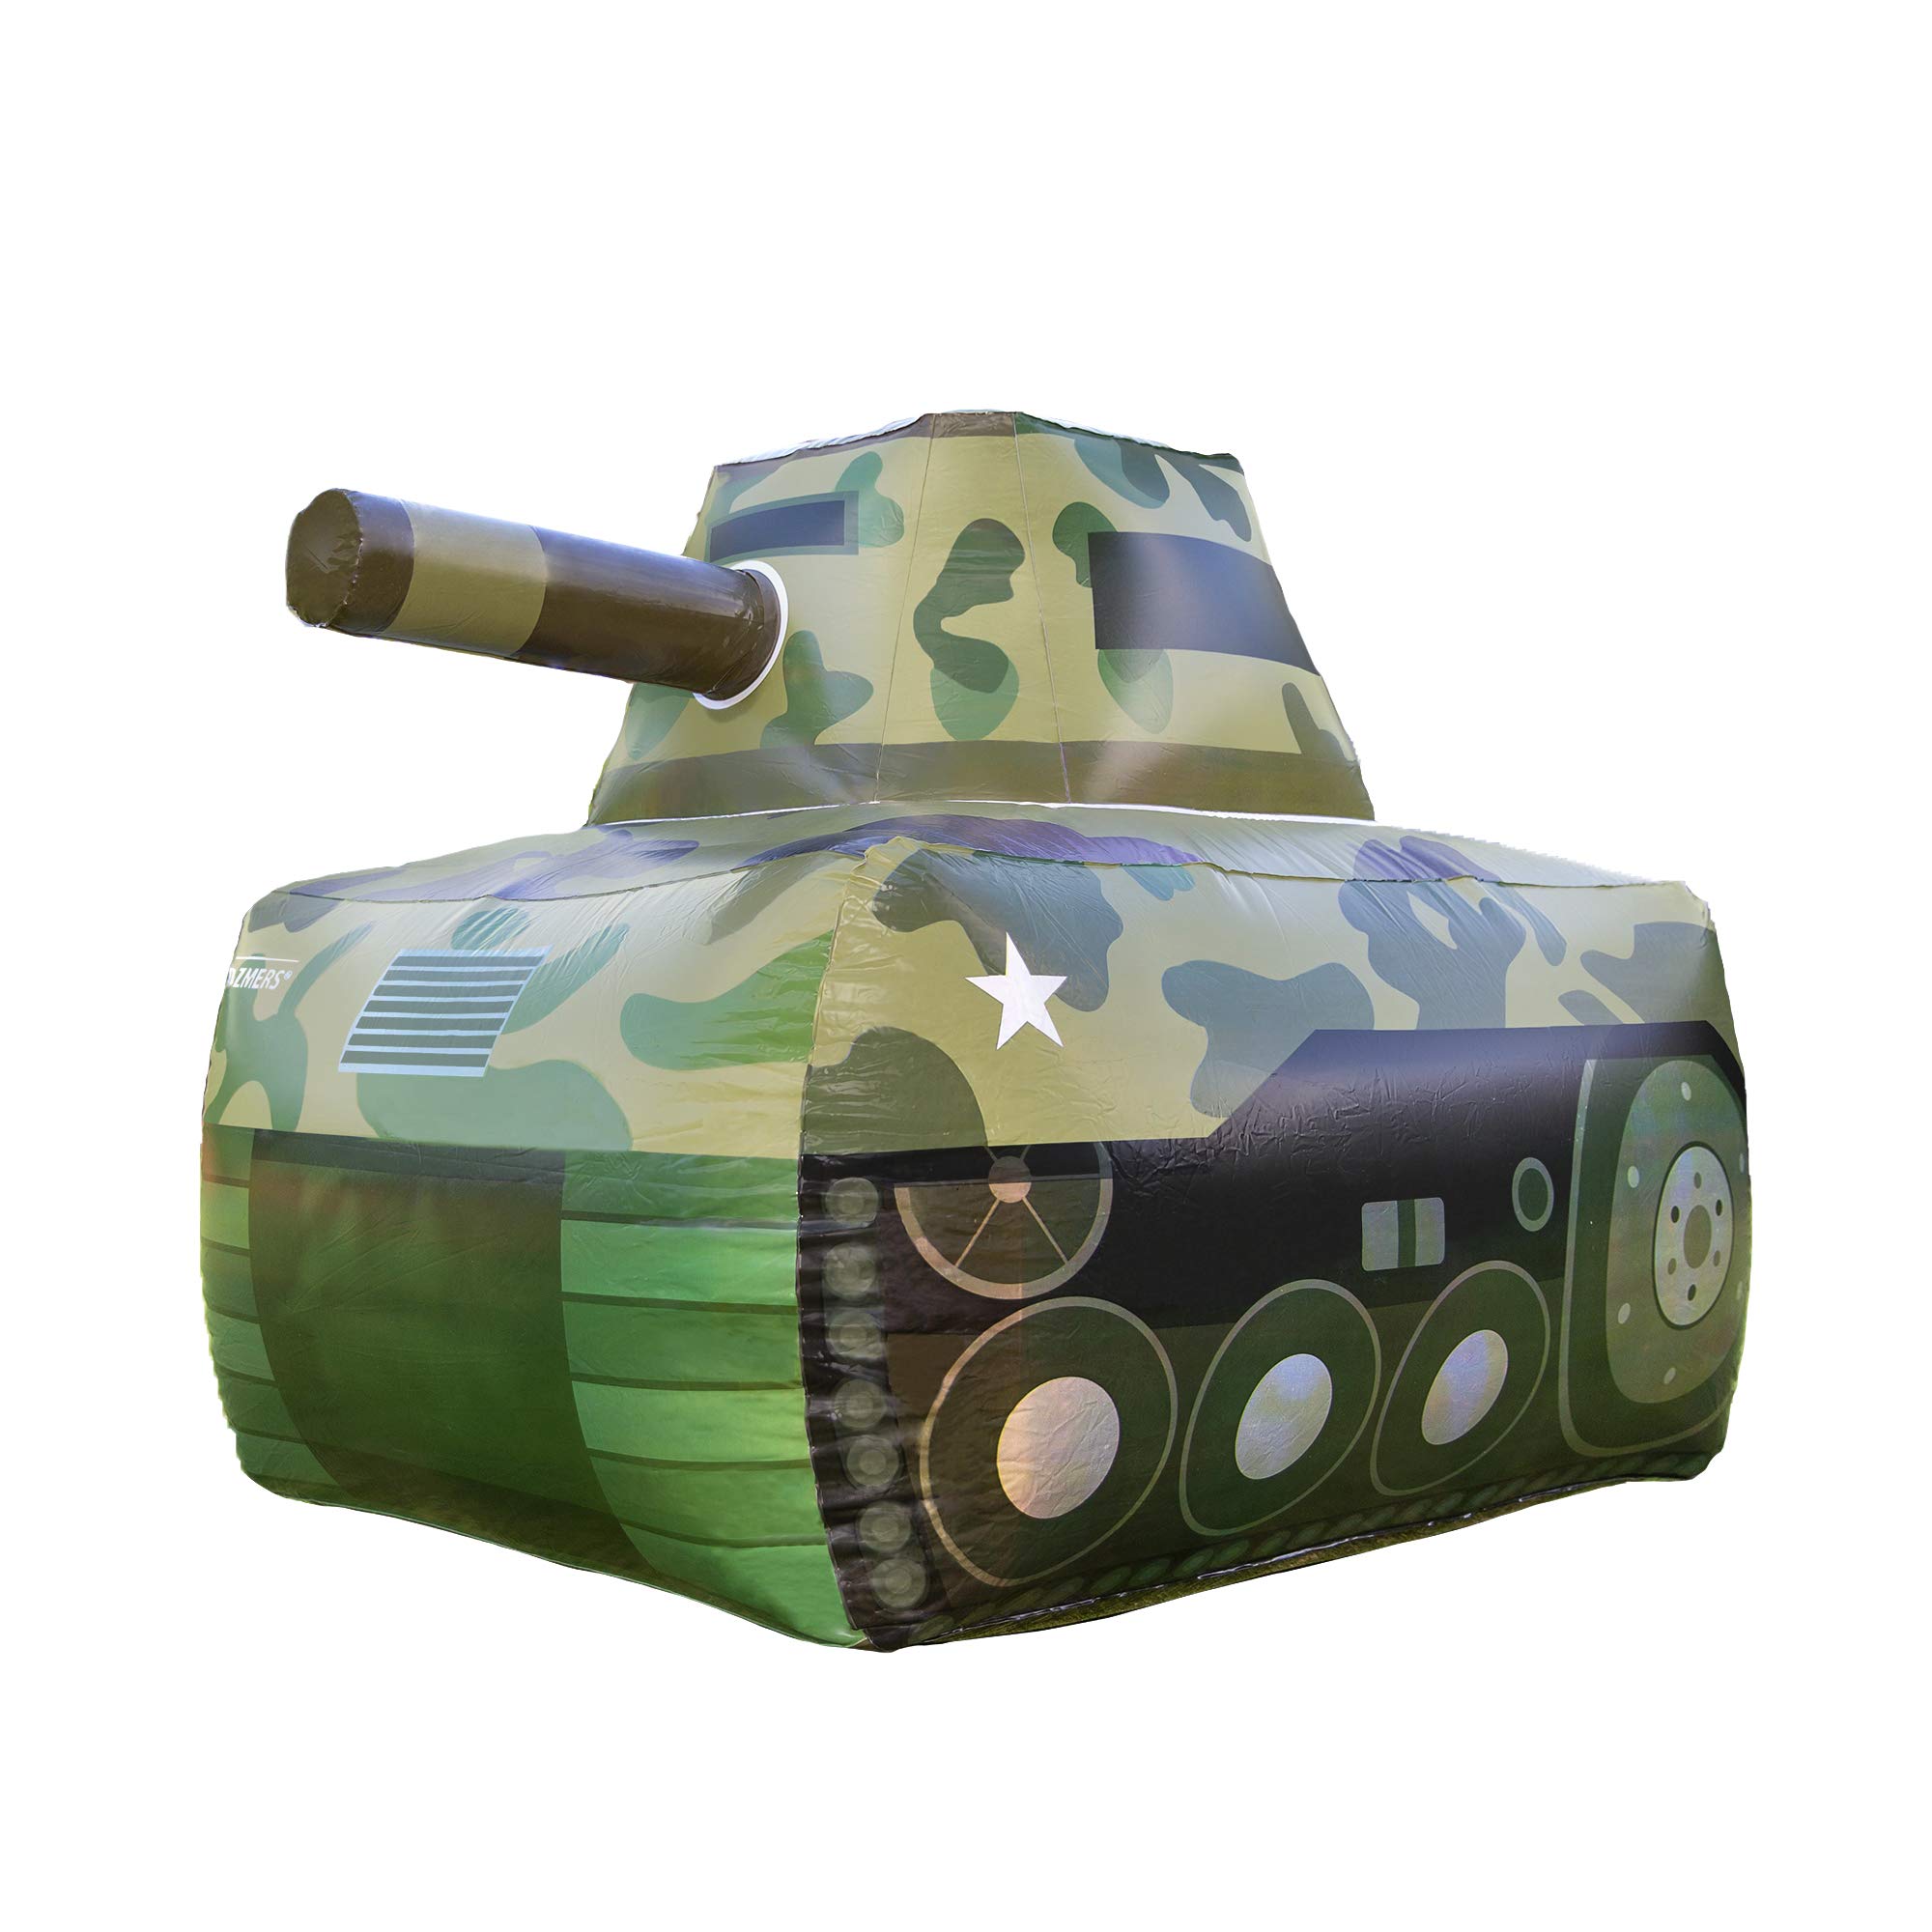 Dazmers Inflatable Army Tank - Inflatable Military Battle Tank for Nerf Party War for Kids Inflatable Battle Obstacles Set - Inflatable Bunker - 3 Inflatable Barriers - Barrel, Container Box and Wall